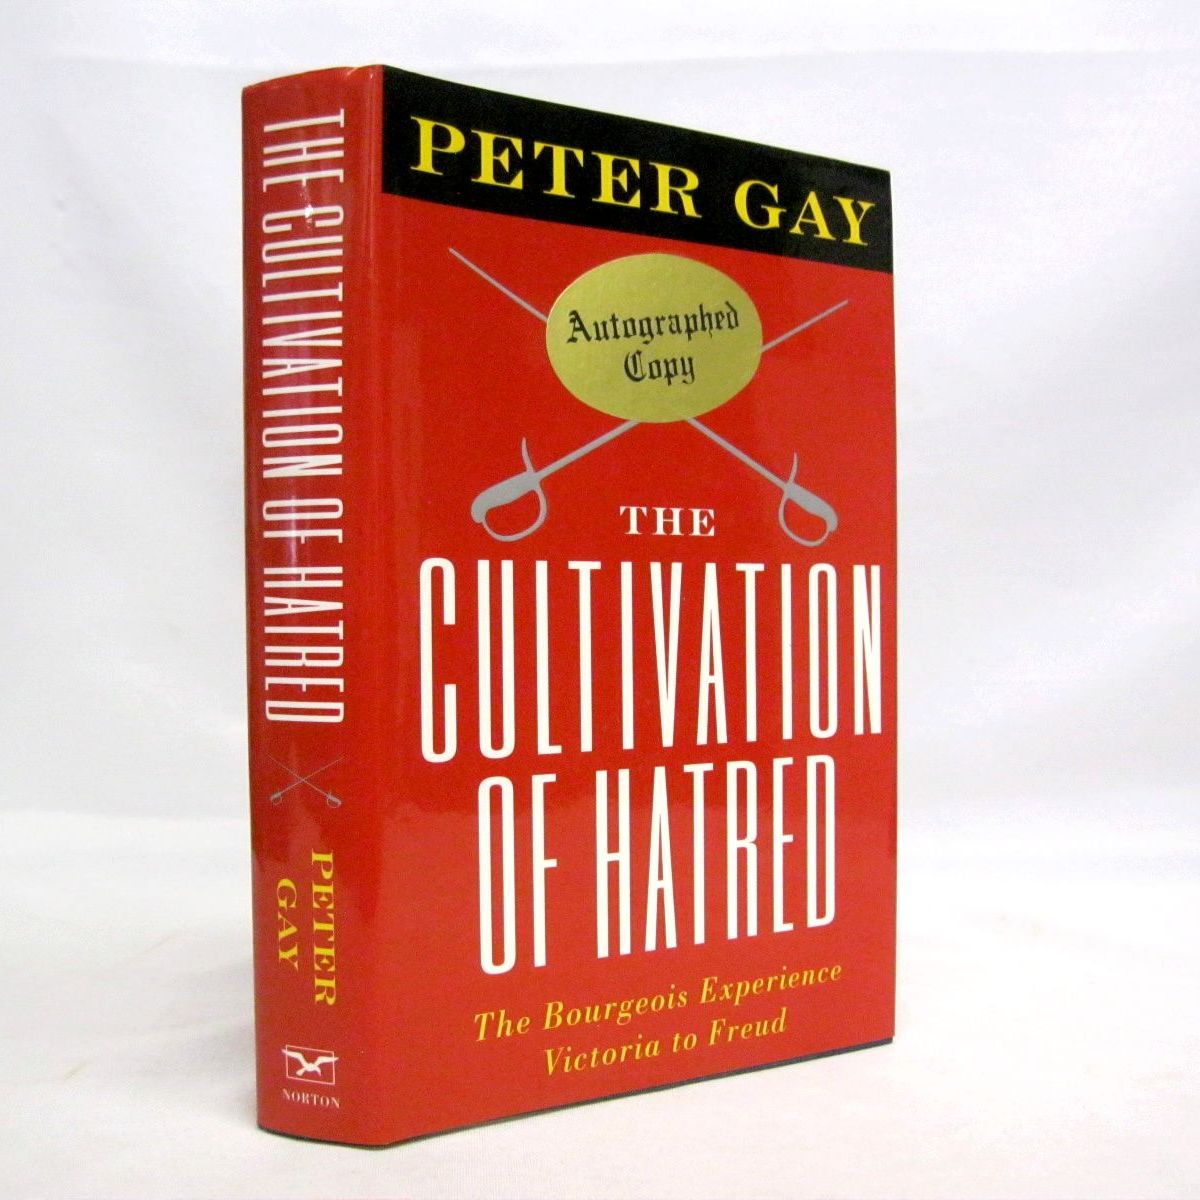 The Cultivation of Hate: The Bourgeouis Experience Victoria to Freud, Volume 2 by Peter Gay